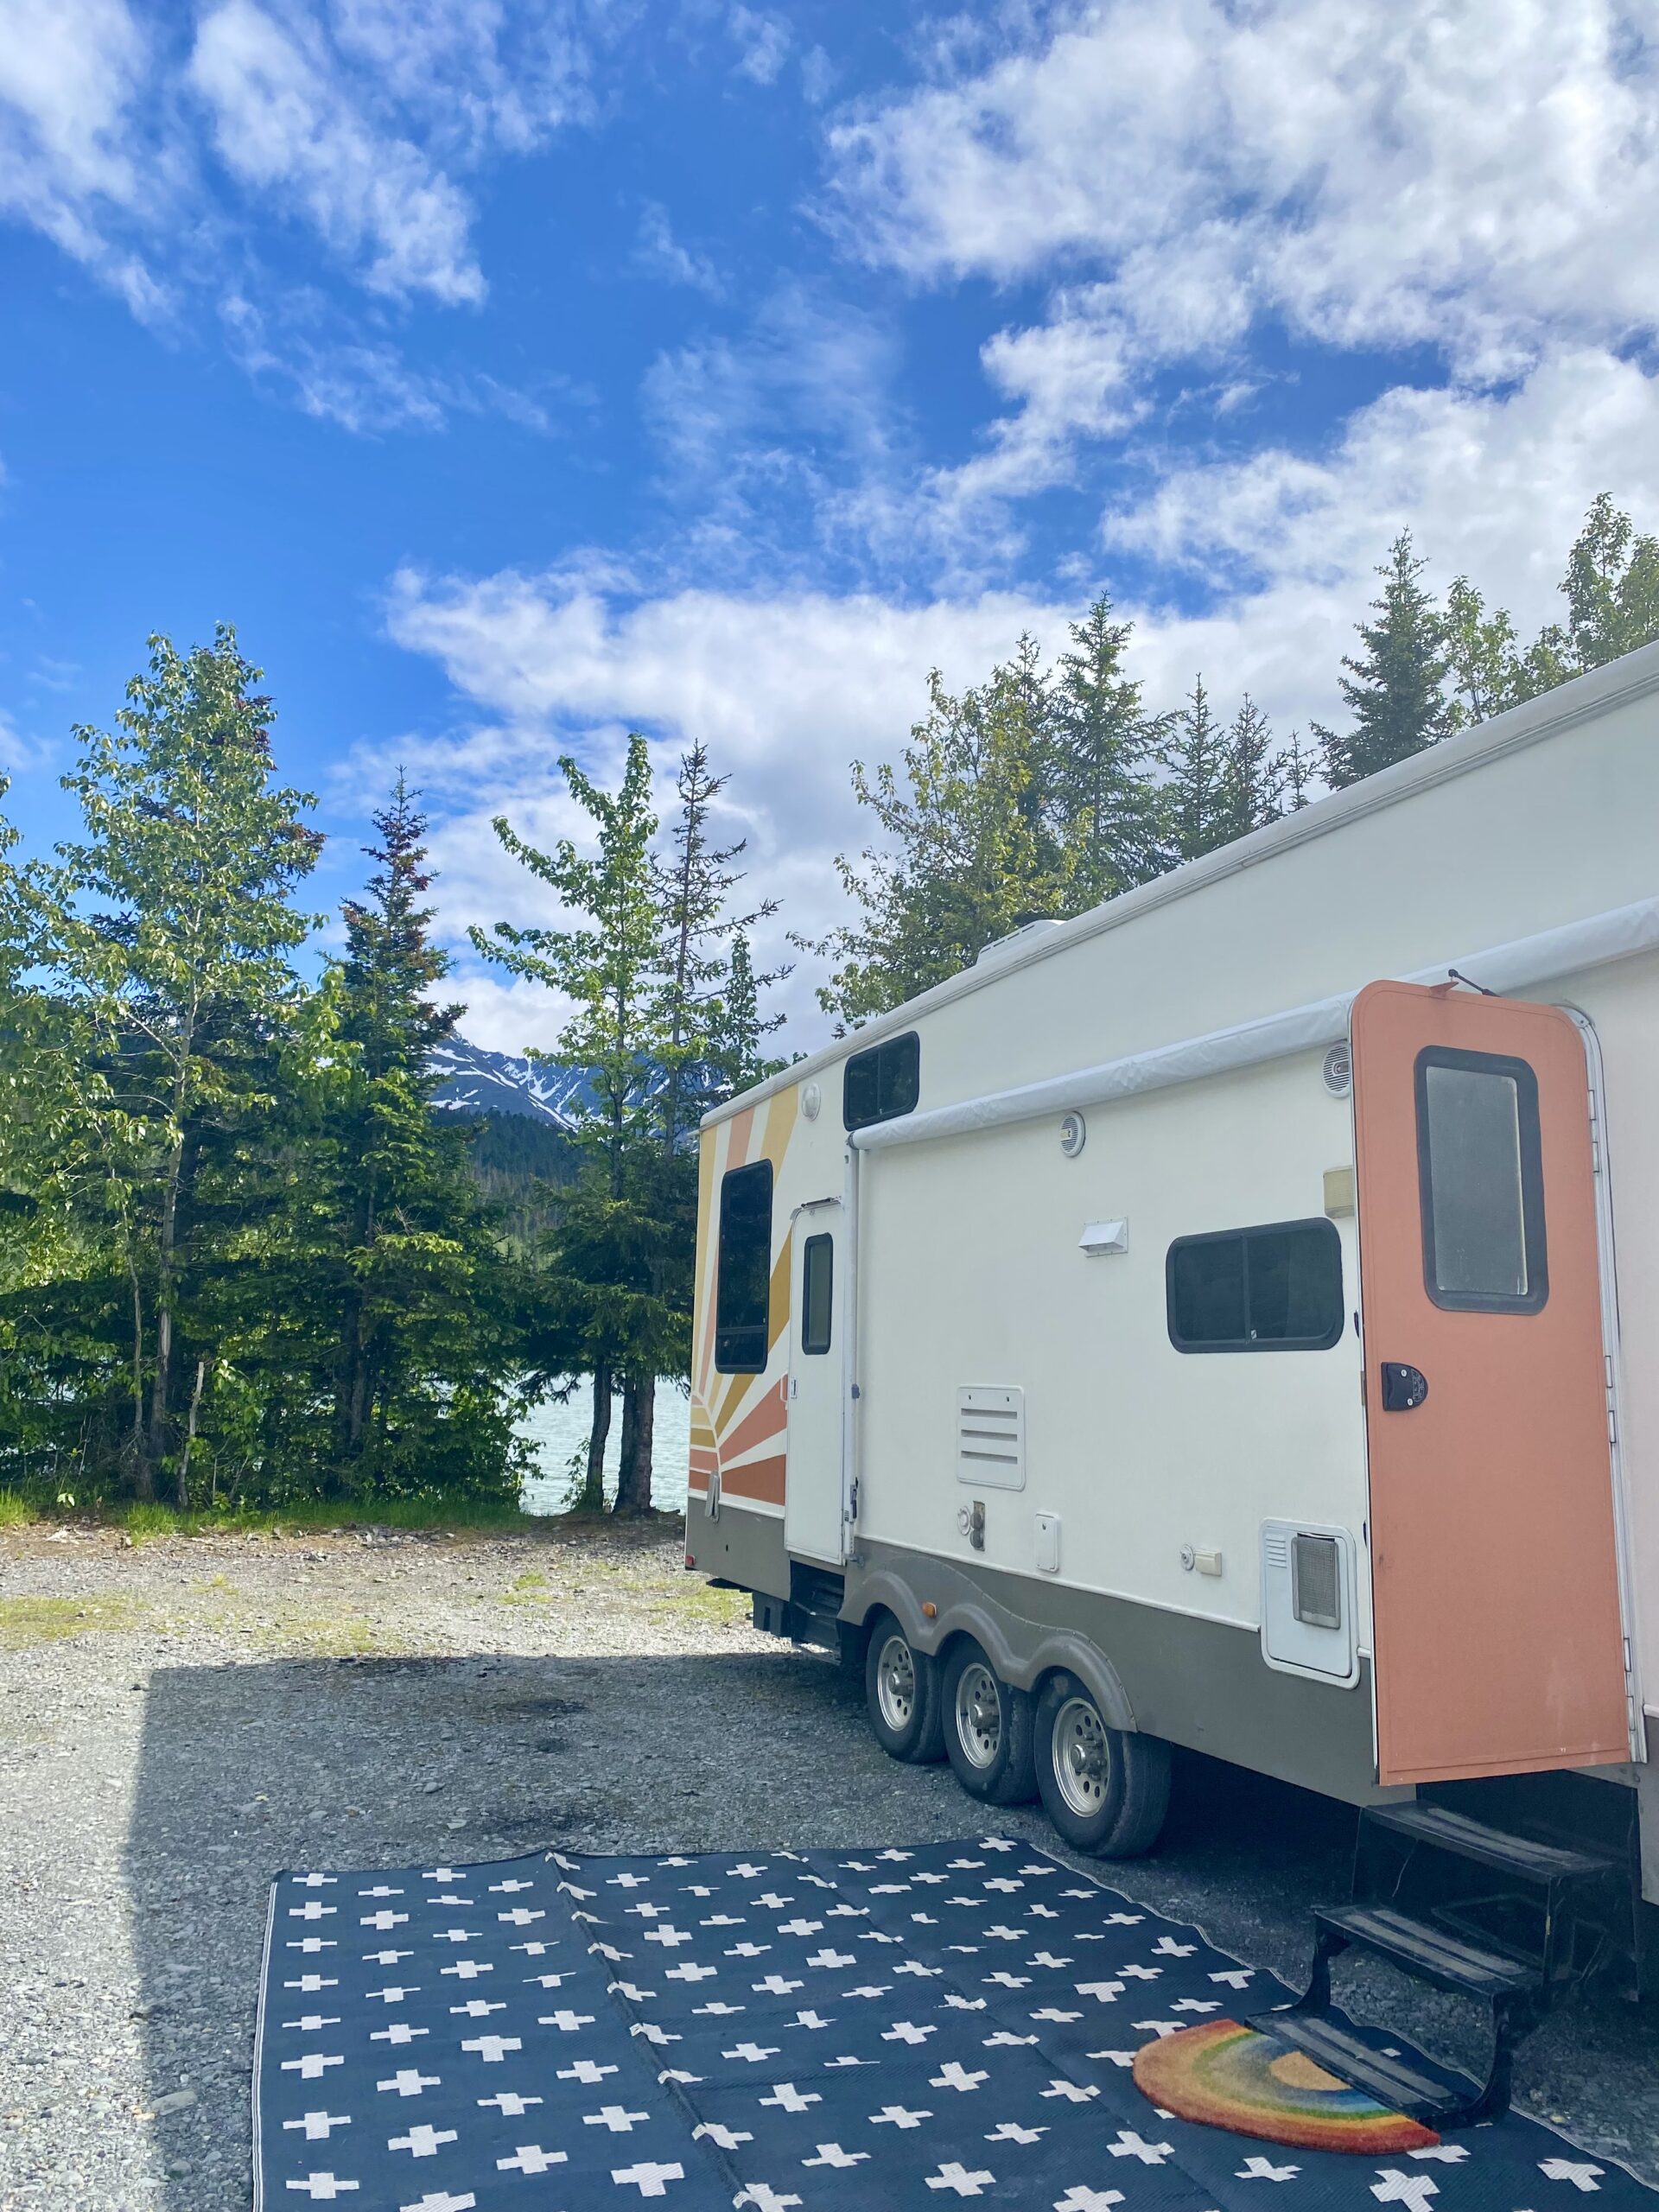 Our Favorite Camping in Alaska Spots: Stunning Campground & Boondocking!